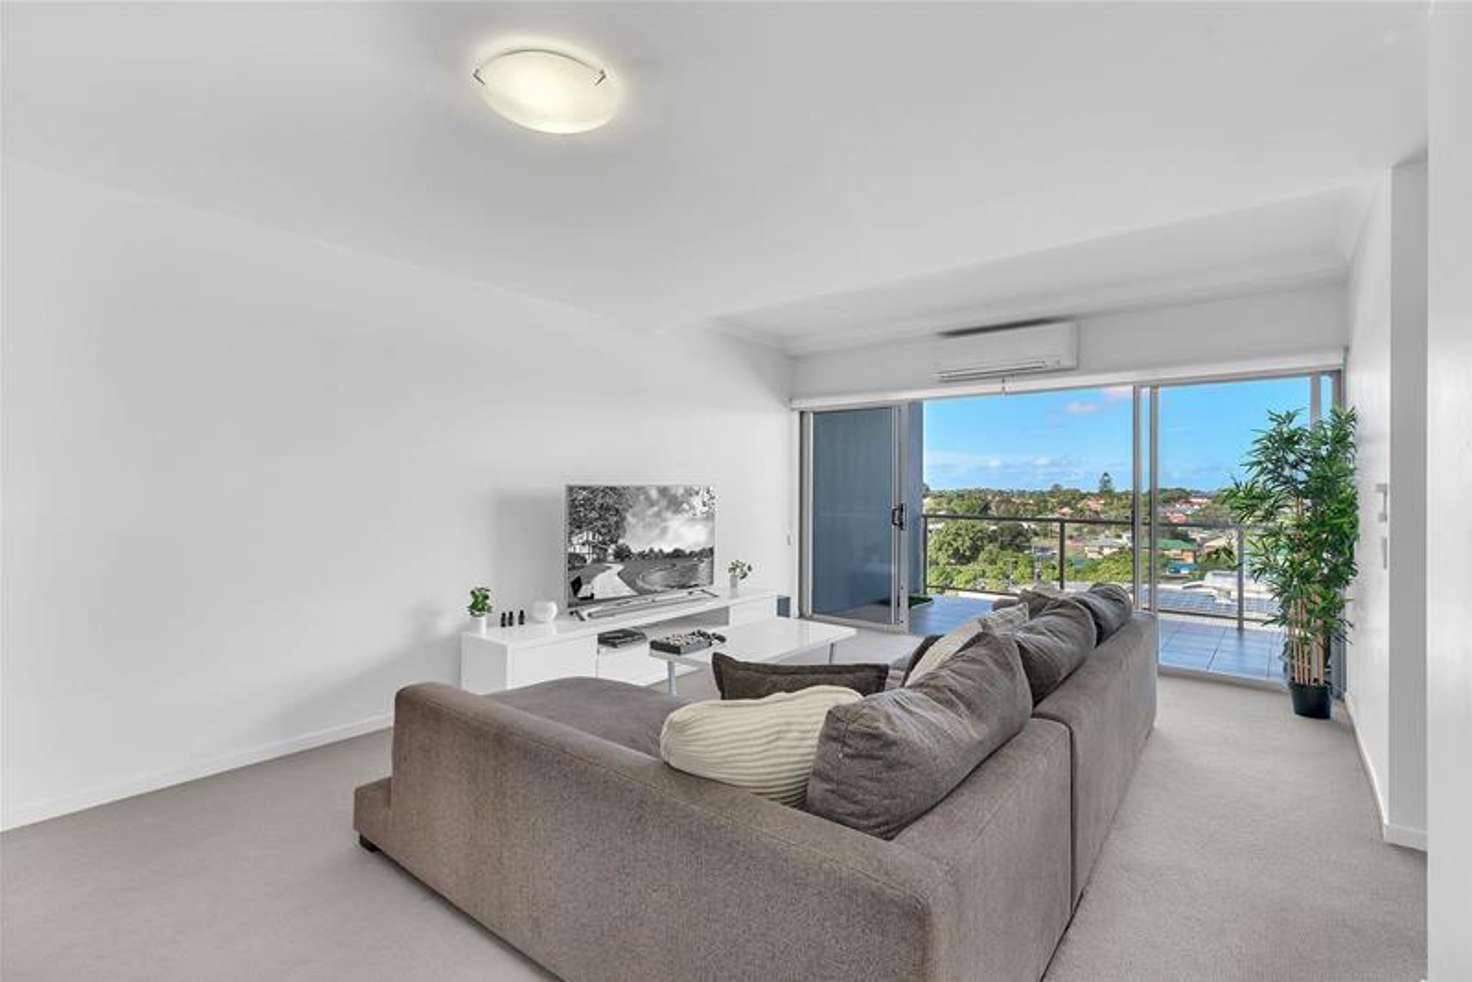 Main view of Homely apartment listing, 404/15 Playfield Street, Chermside QLD 4032